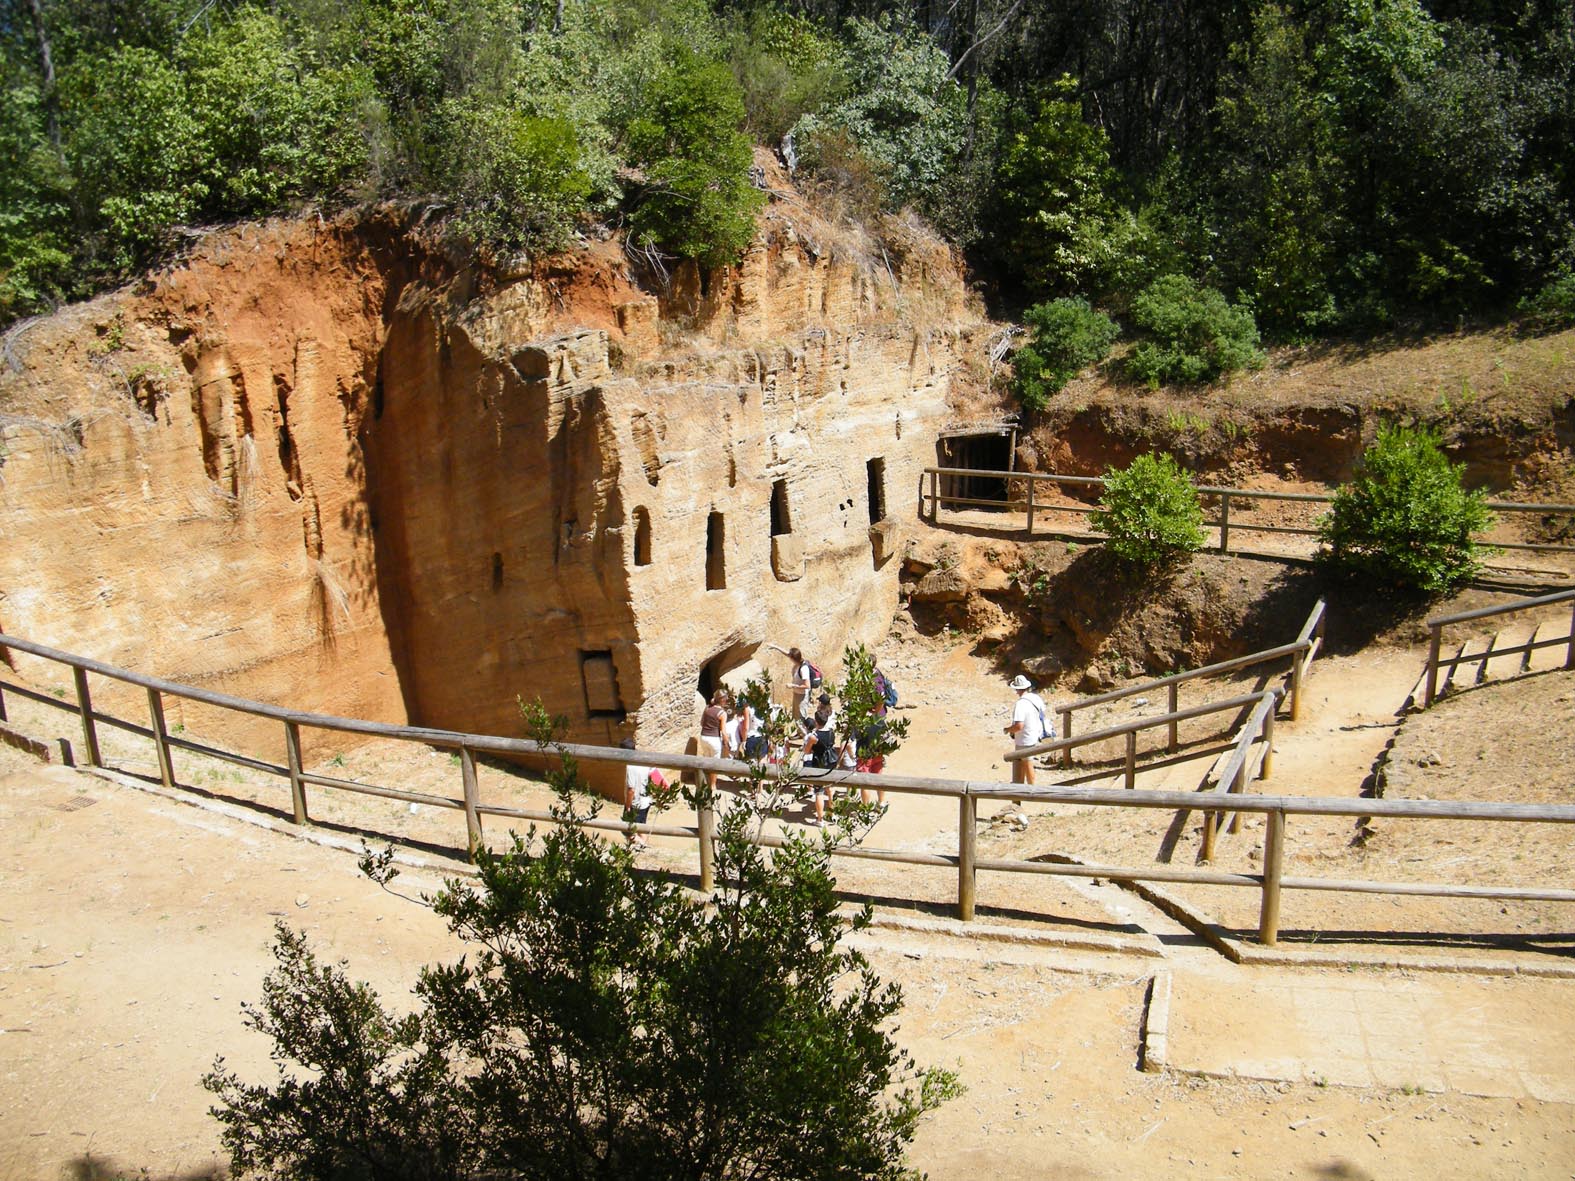 Archeological park of Baratti and Populonia necropolis caves